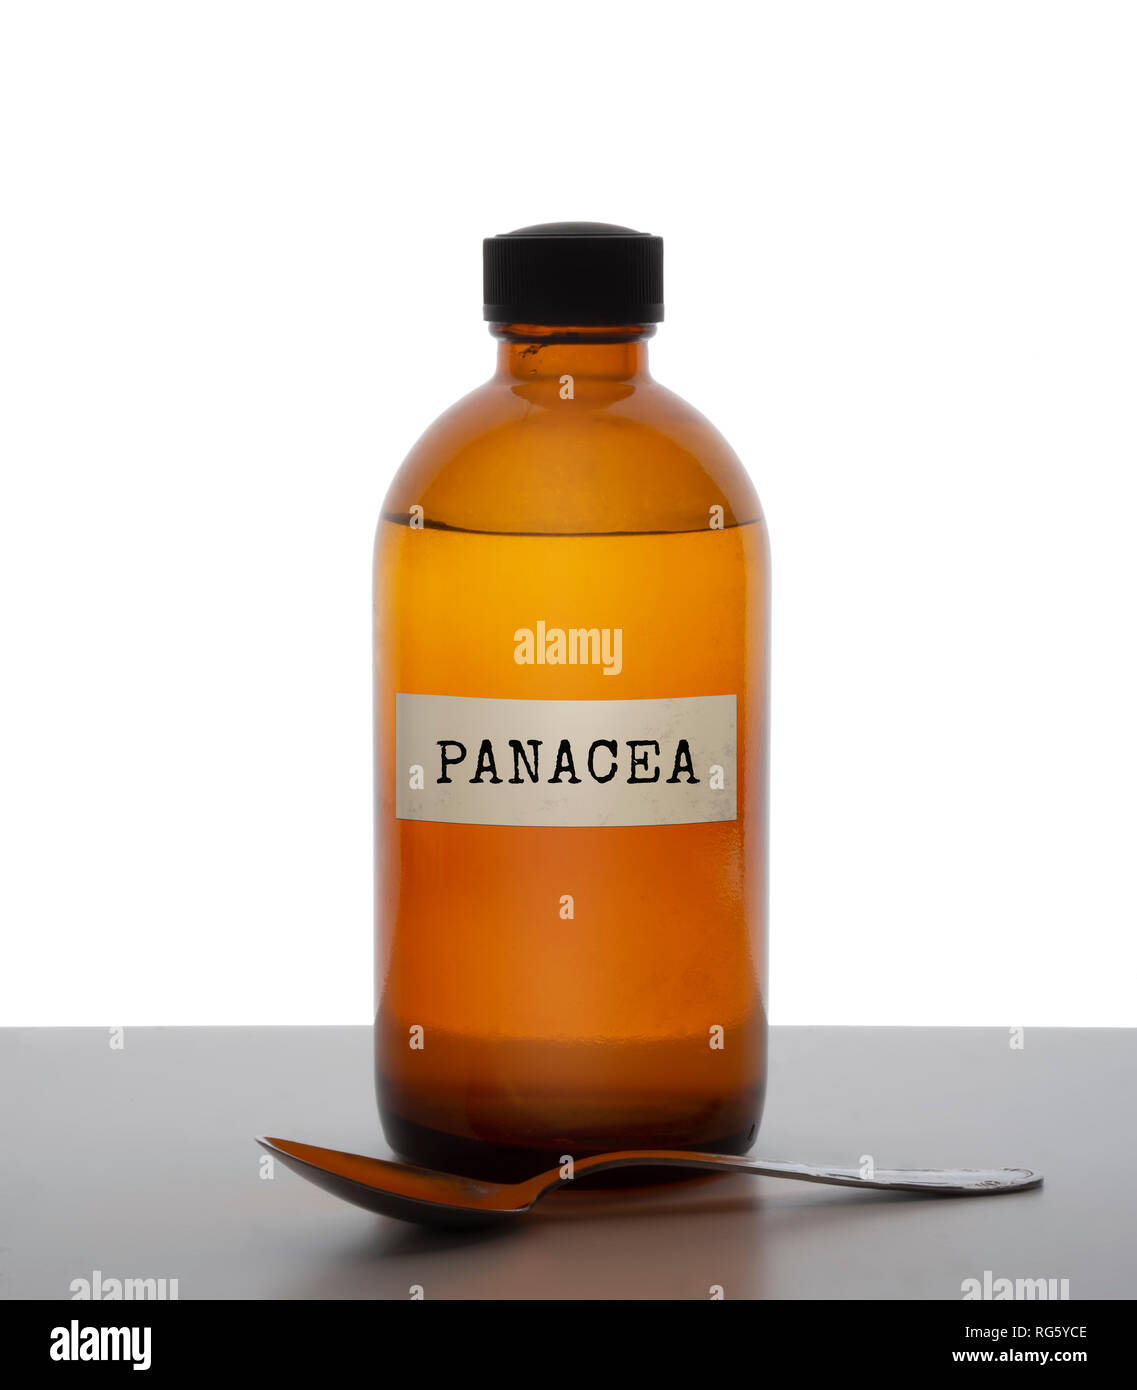 Panacea, magic potion. Old brown glass medicine bottle with spoon, label. Pharmaceutical concept or ironic metaphor, wishful thinking. White behind. Stock Photo